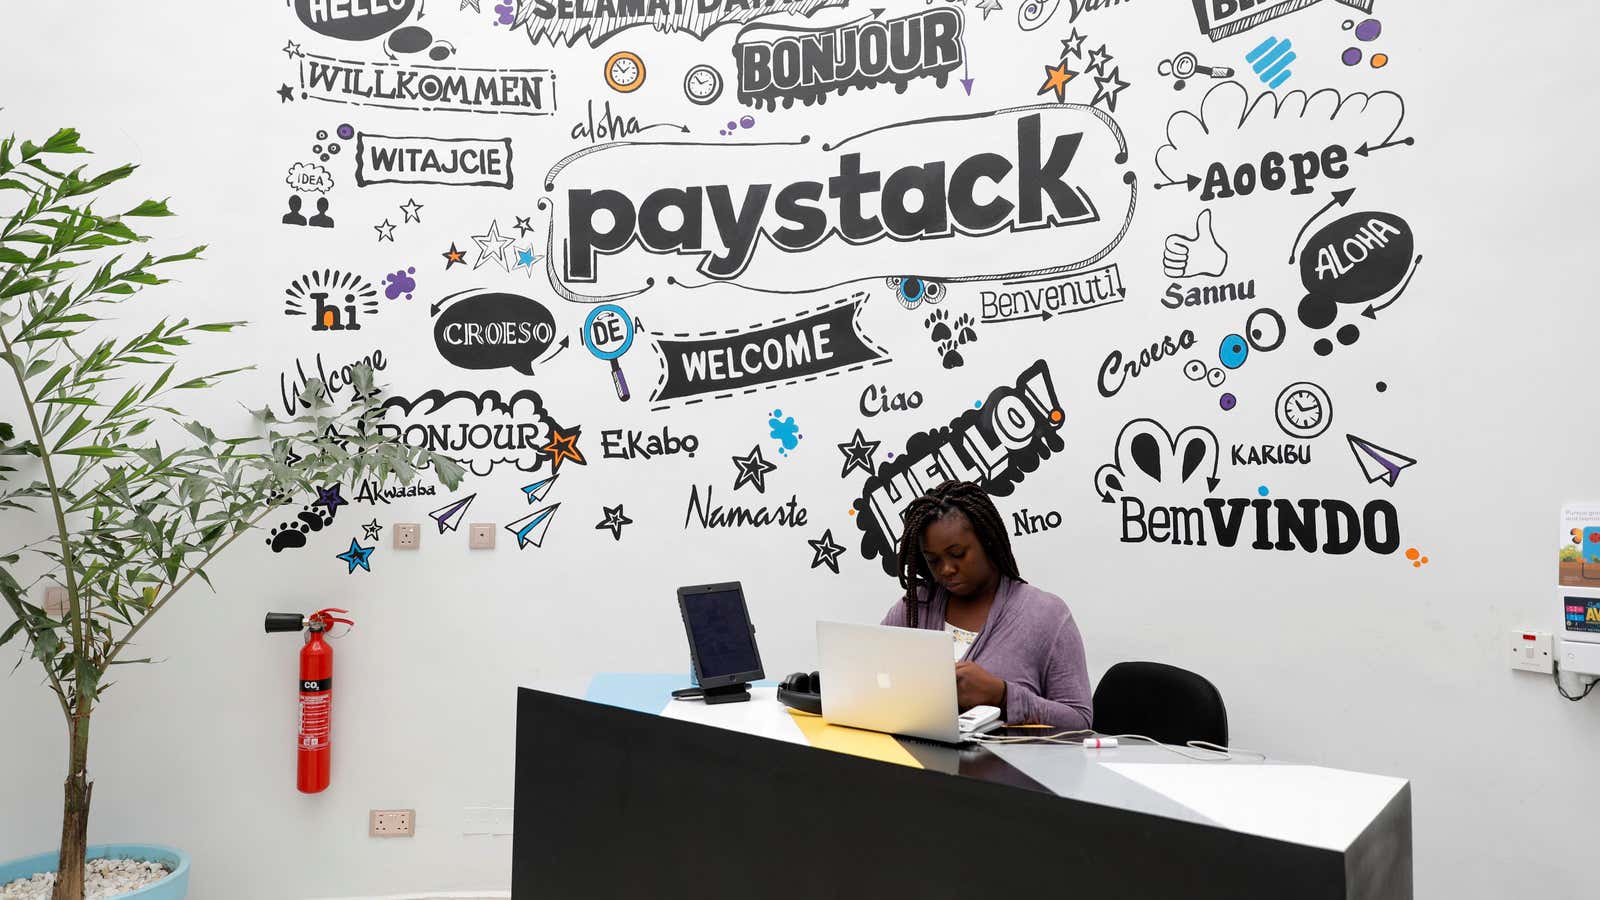 Paystack remains one of Africa’s most valuable companies